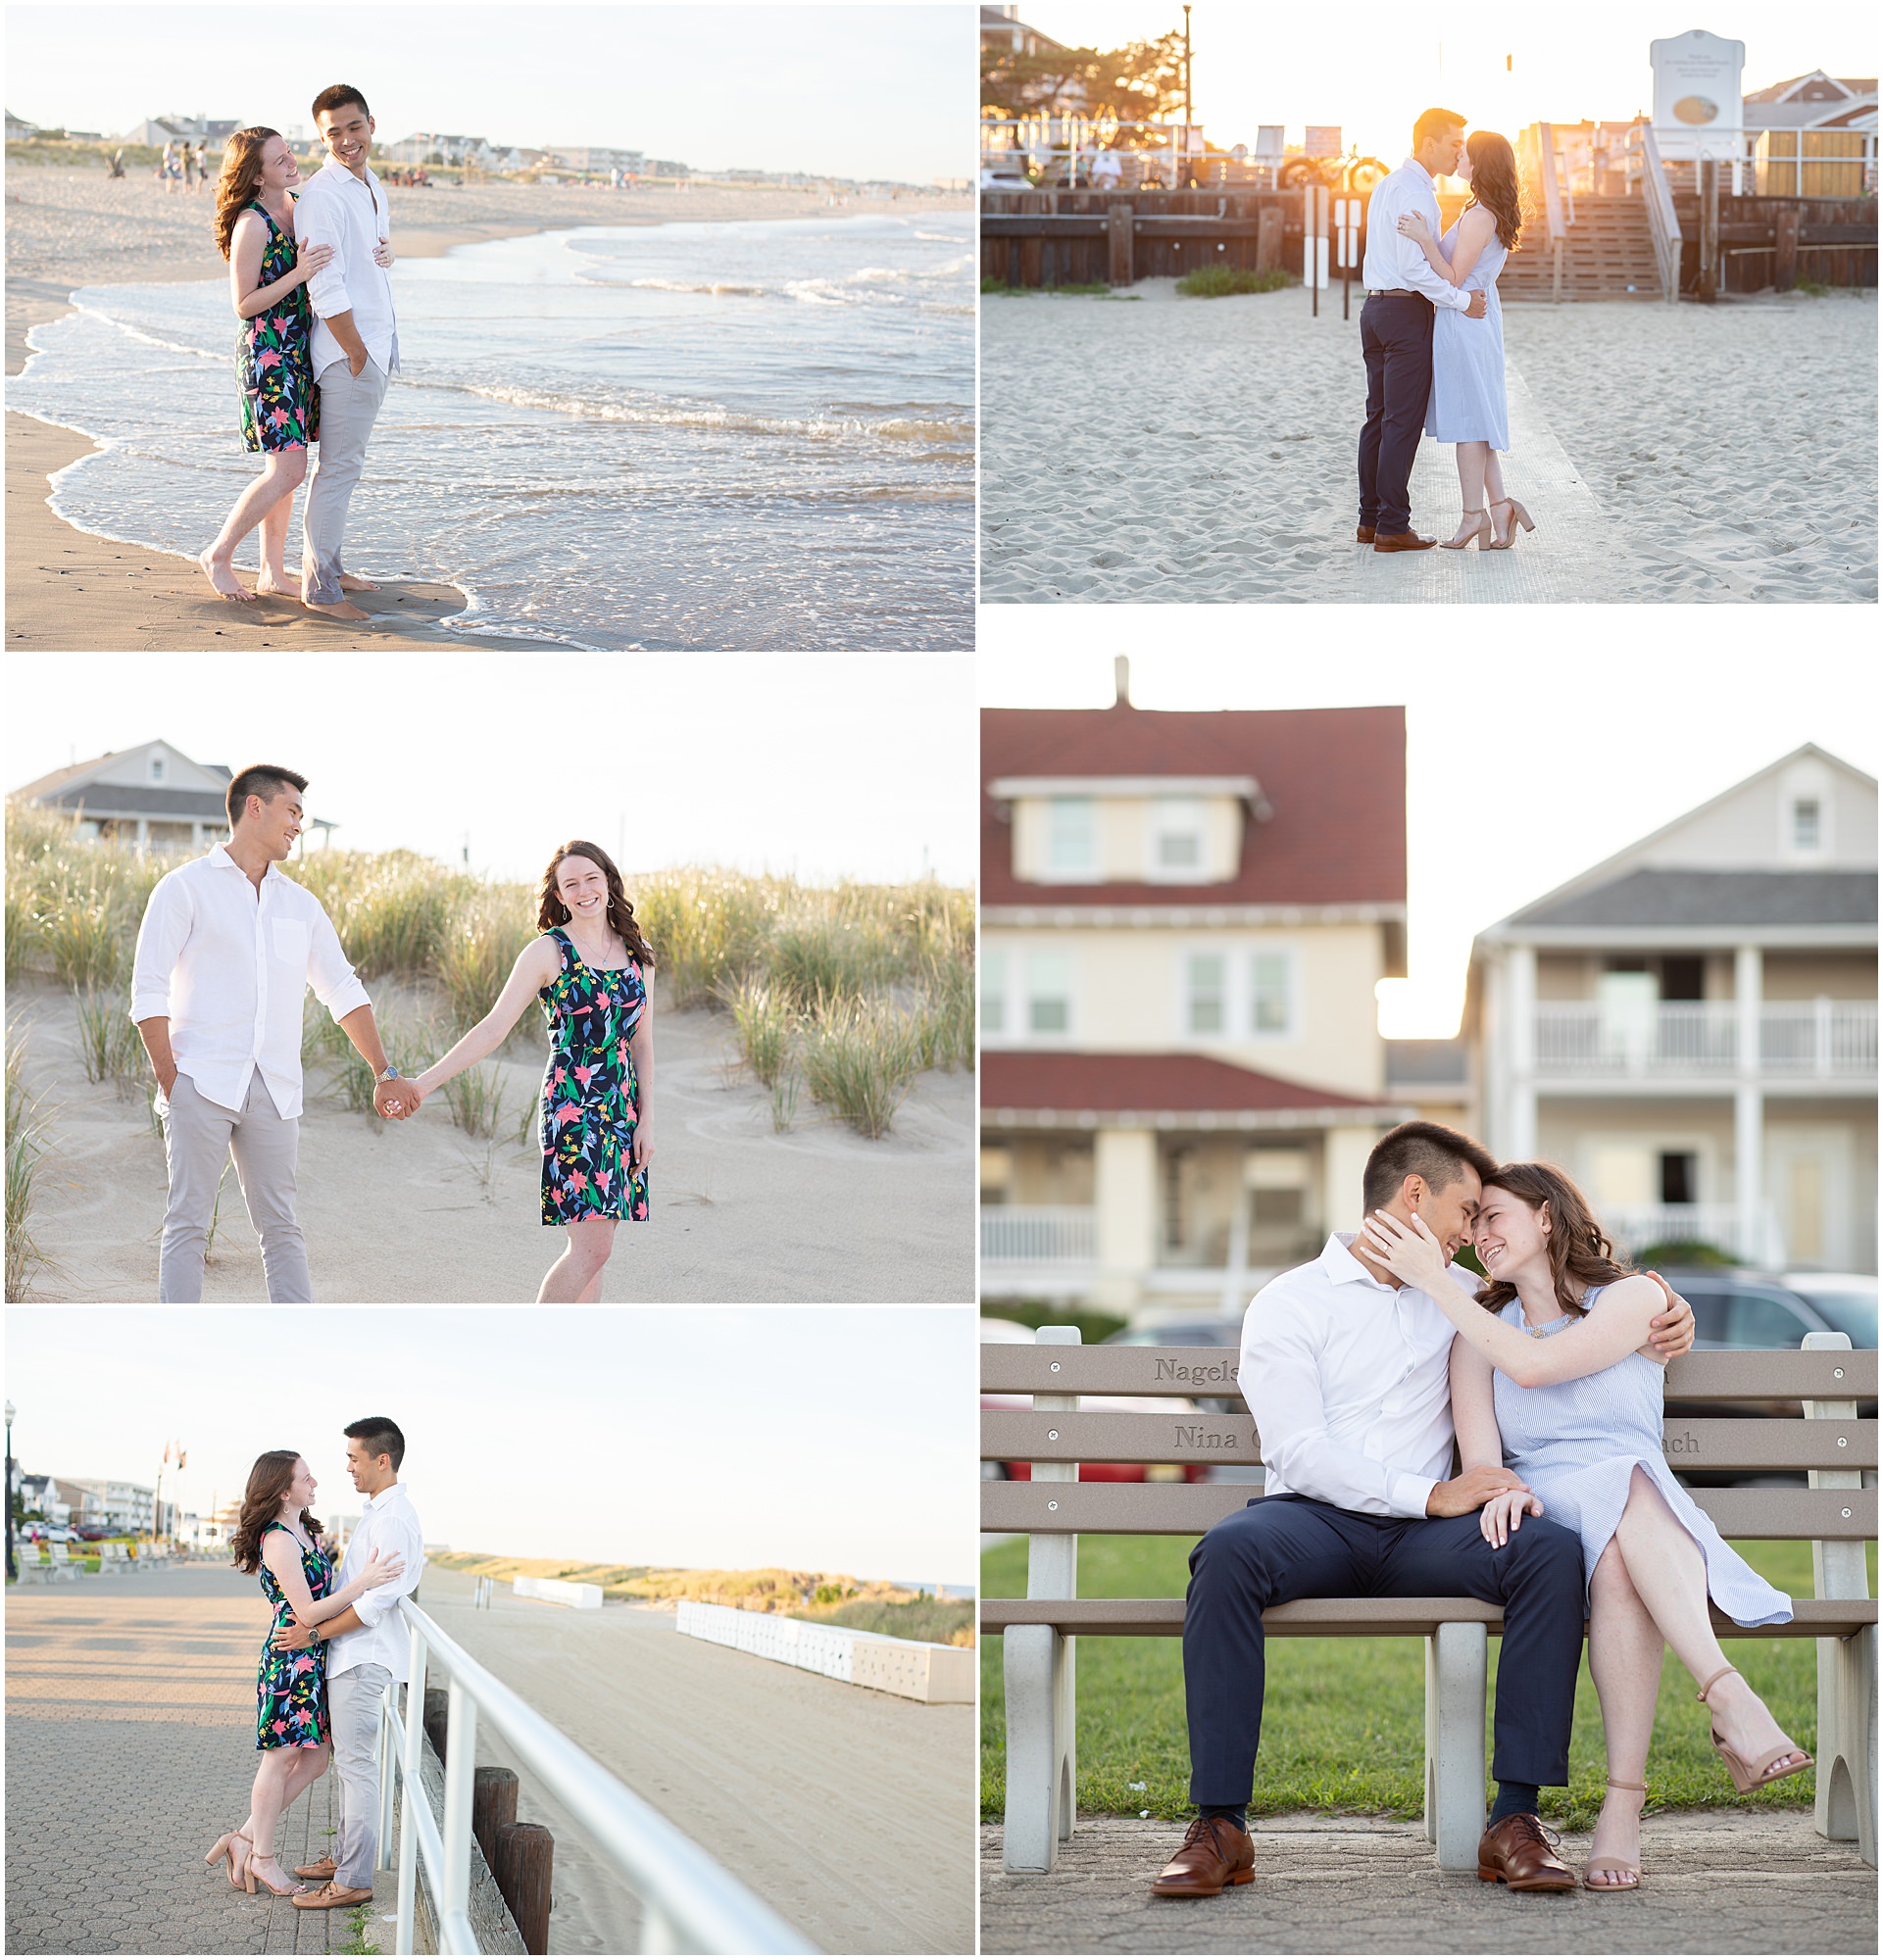 Bradley Beach is a stunning Jersey Shore beach for your NJ engagement session!